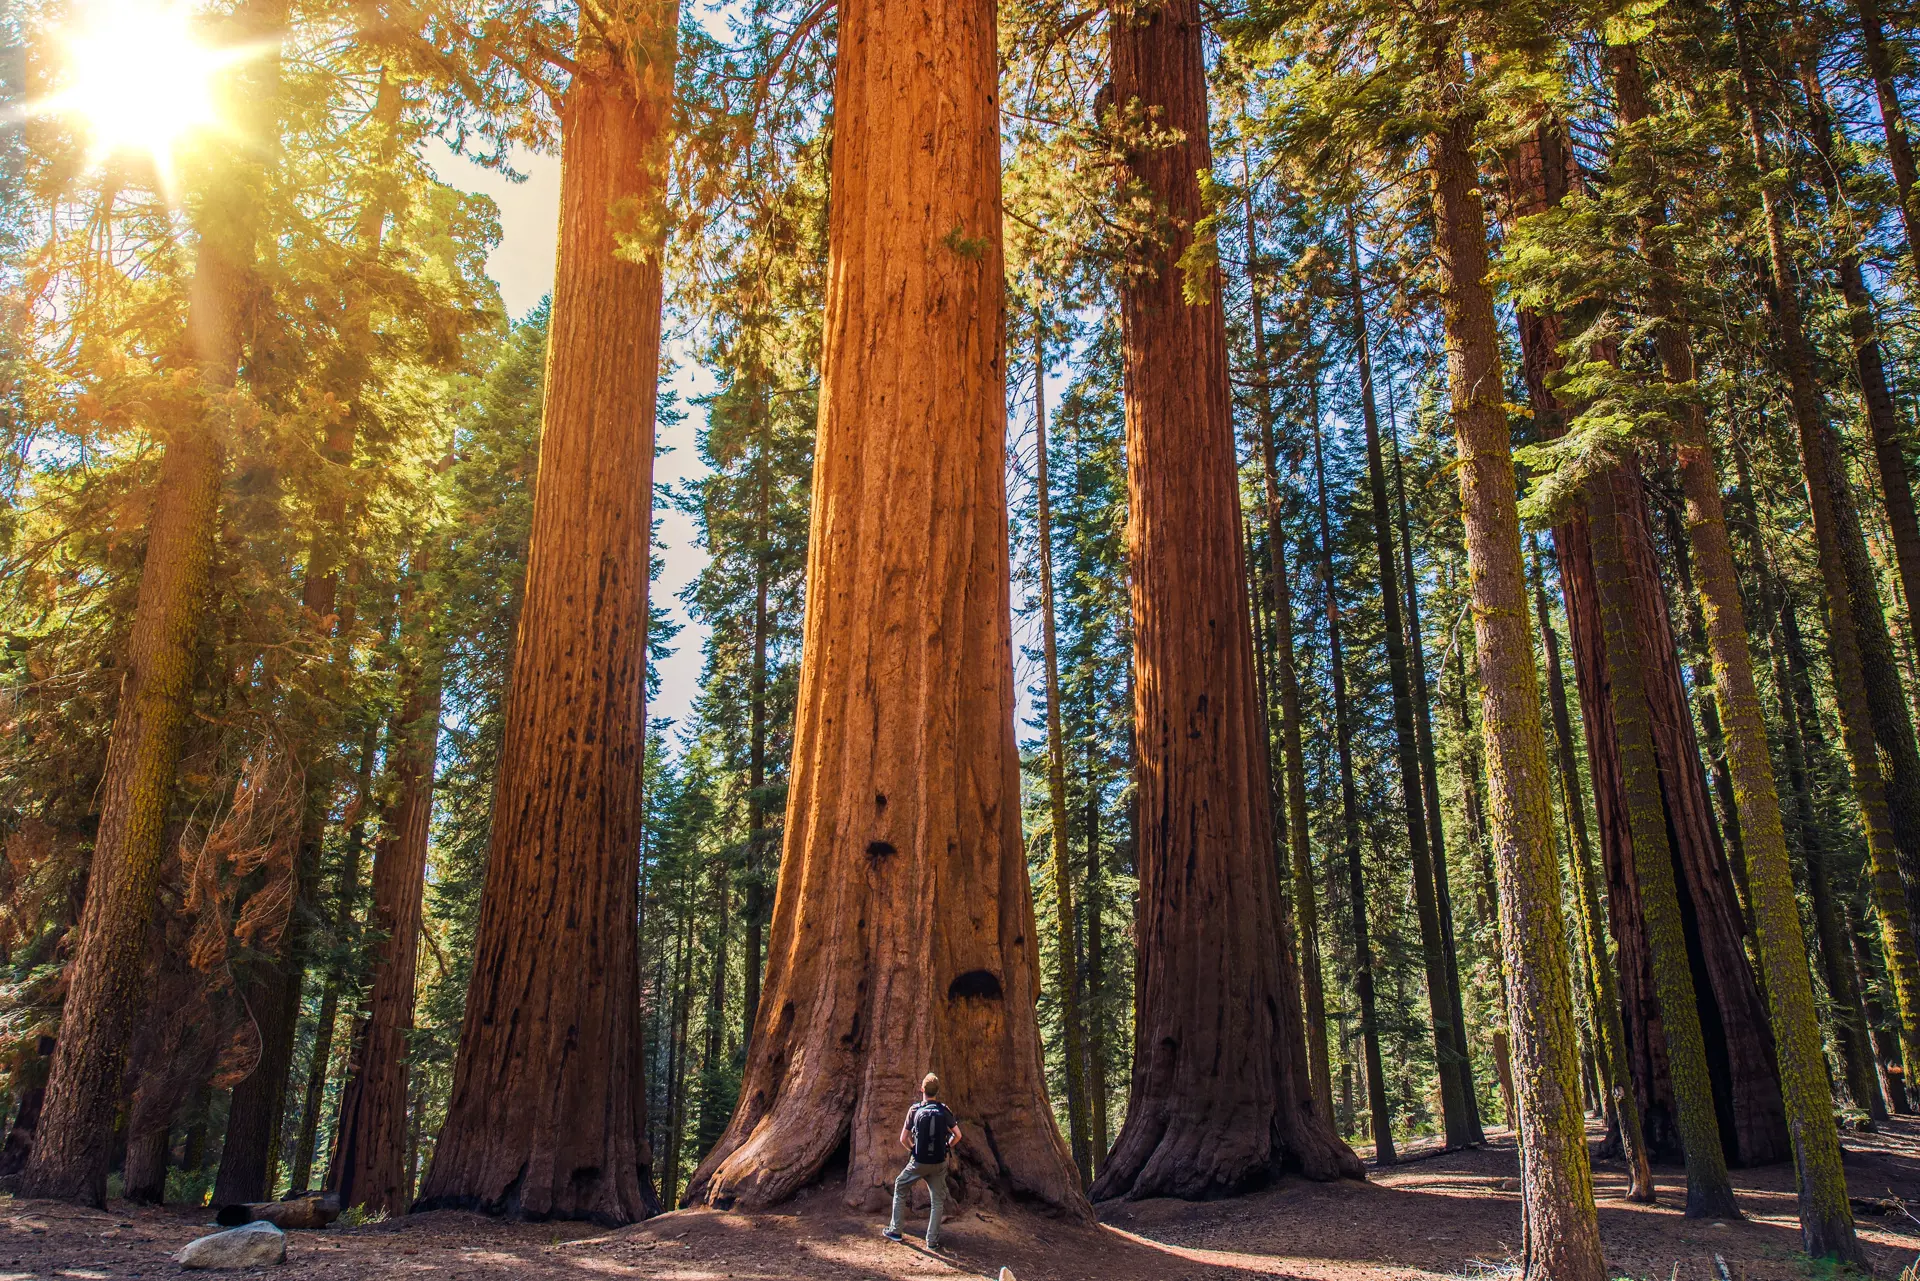 Mand ved Sequoia i Sequoia NP - shutterstock_221462002.jpg